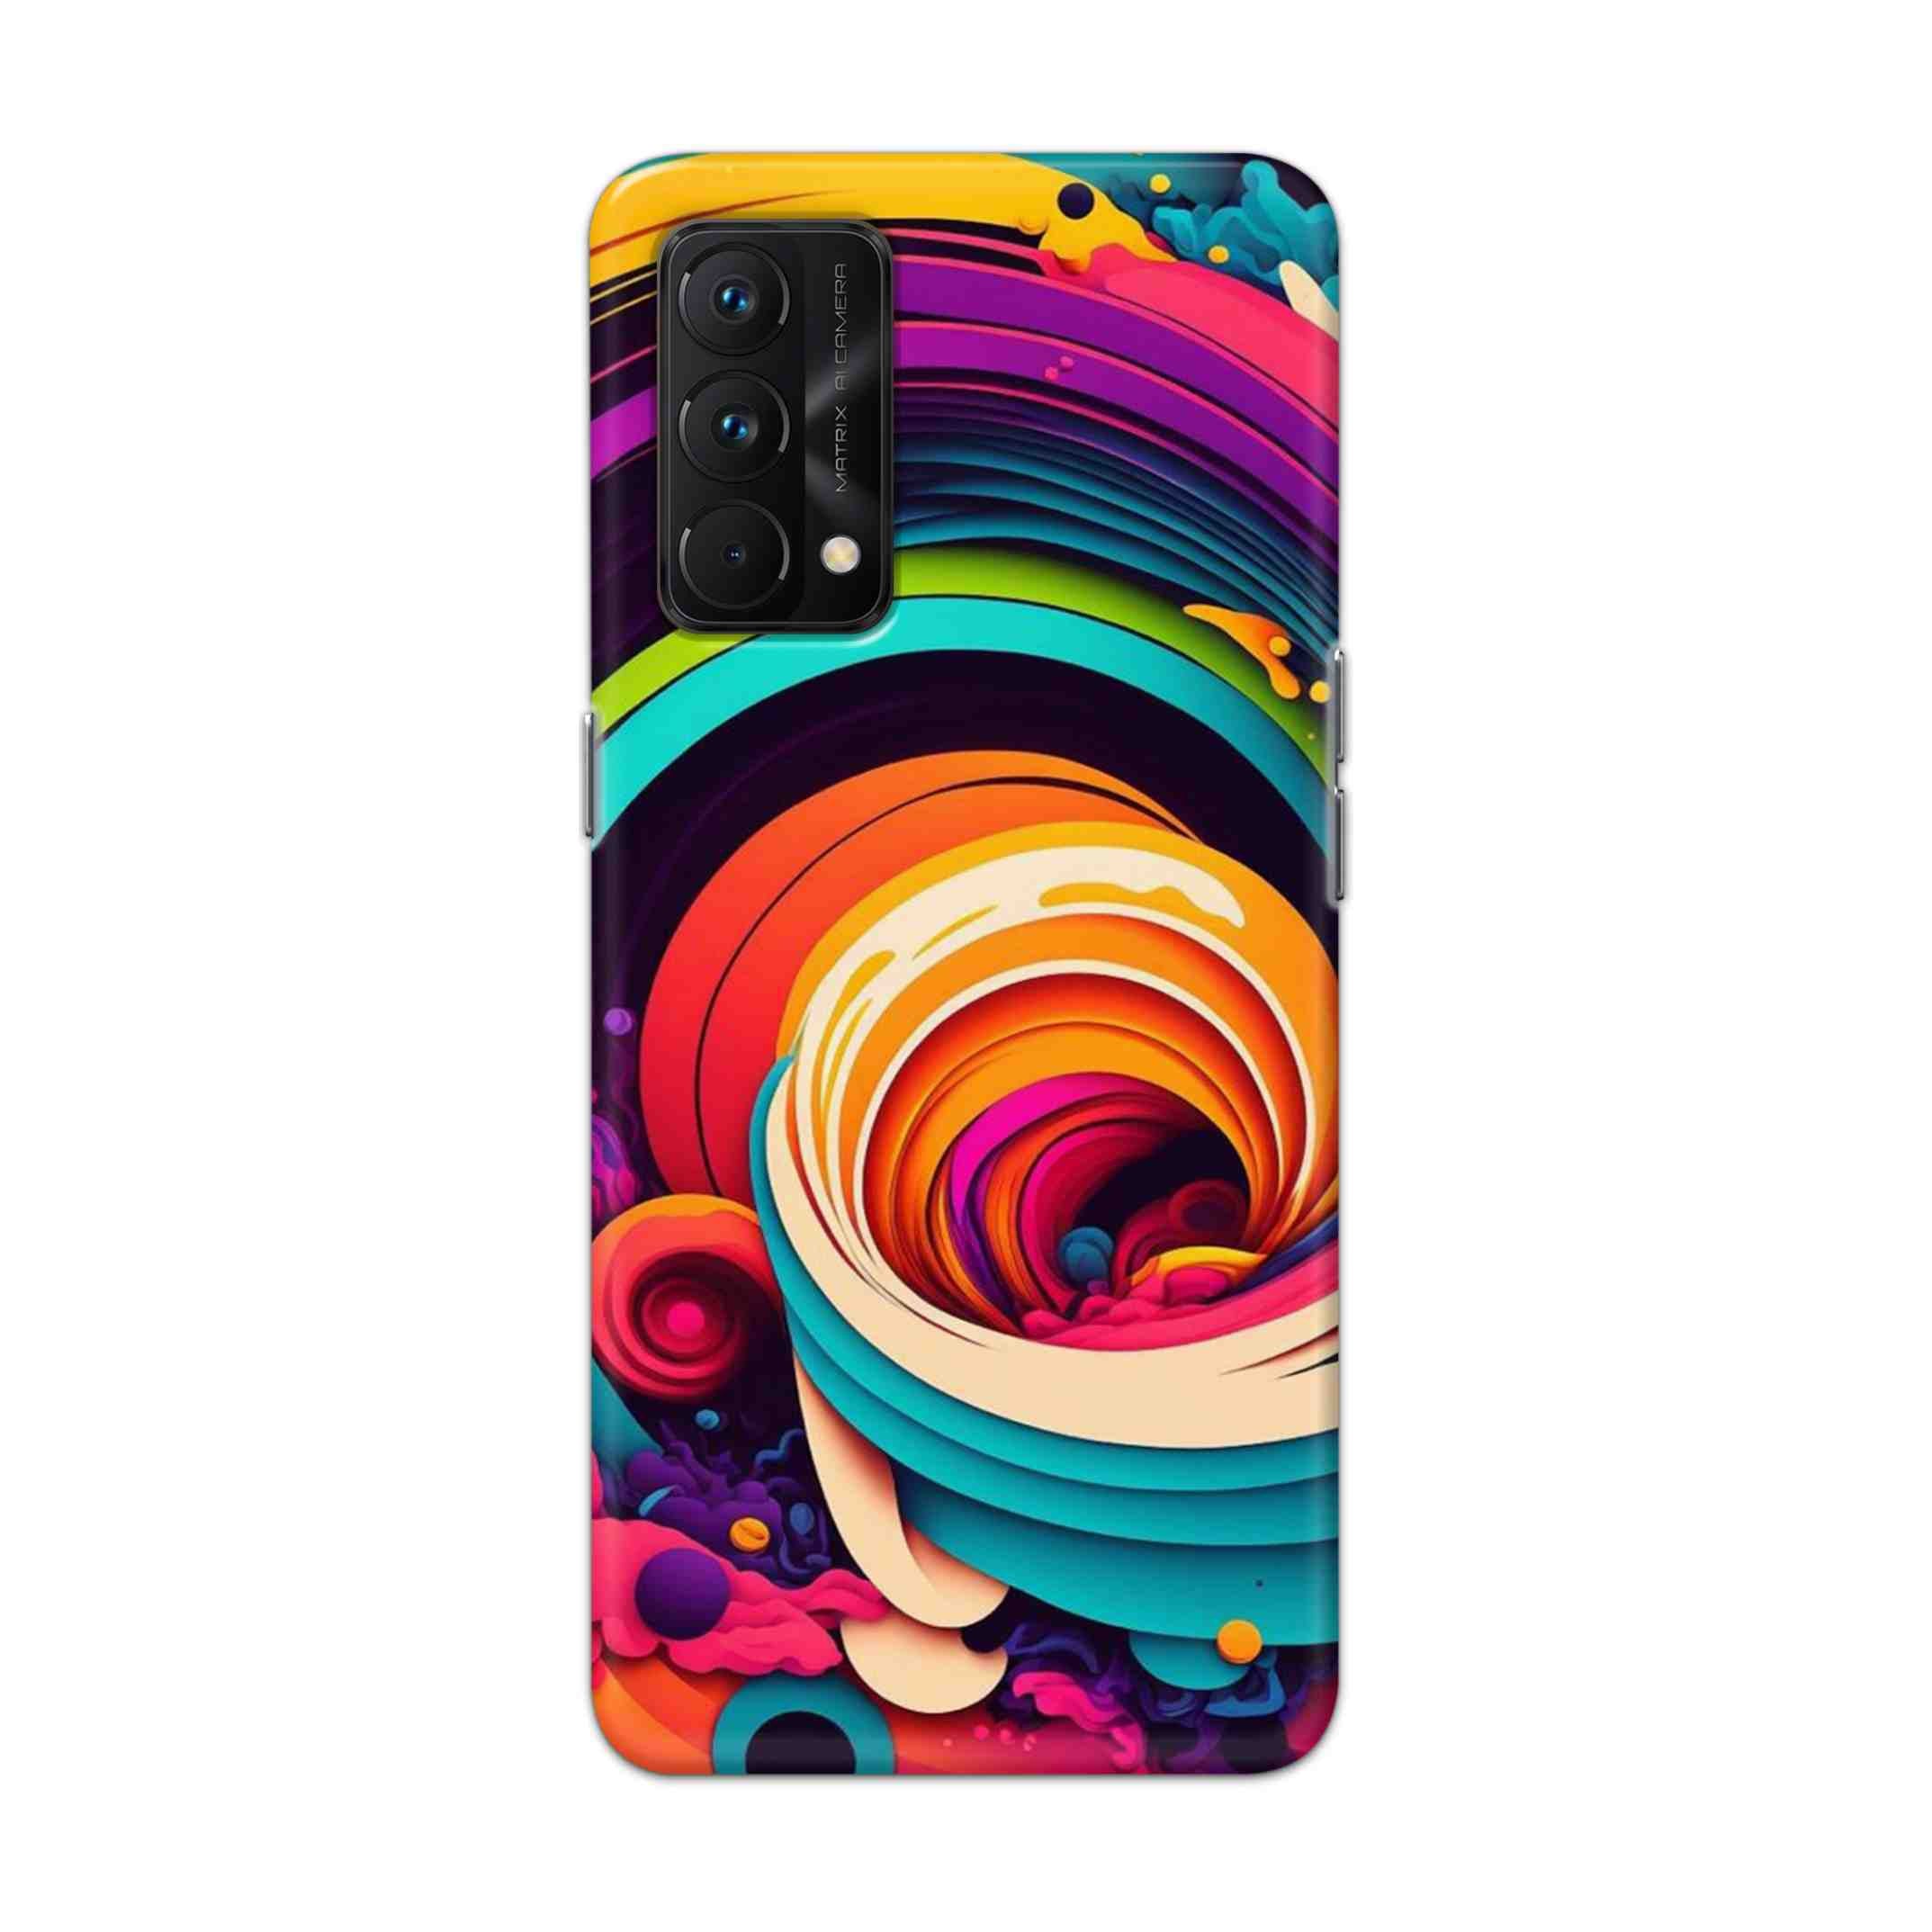 Buy Colour Circle Hard Back Mobile Phone Case Cover For Realme GT Master Online